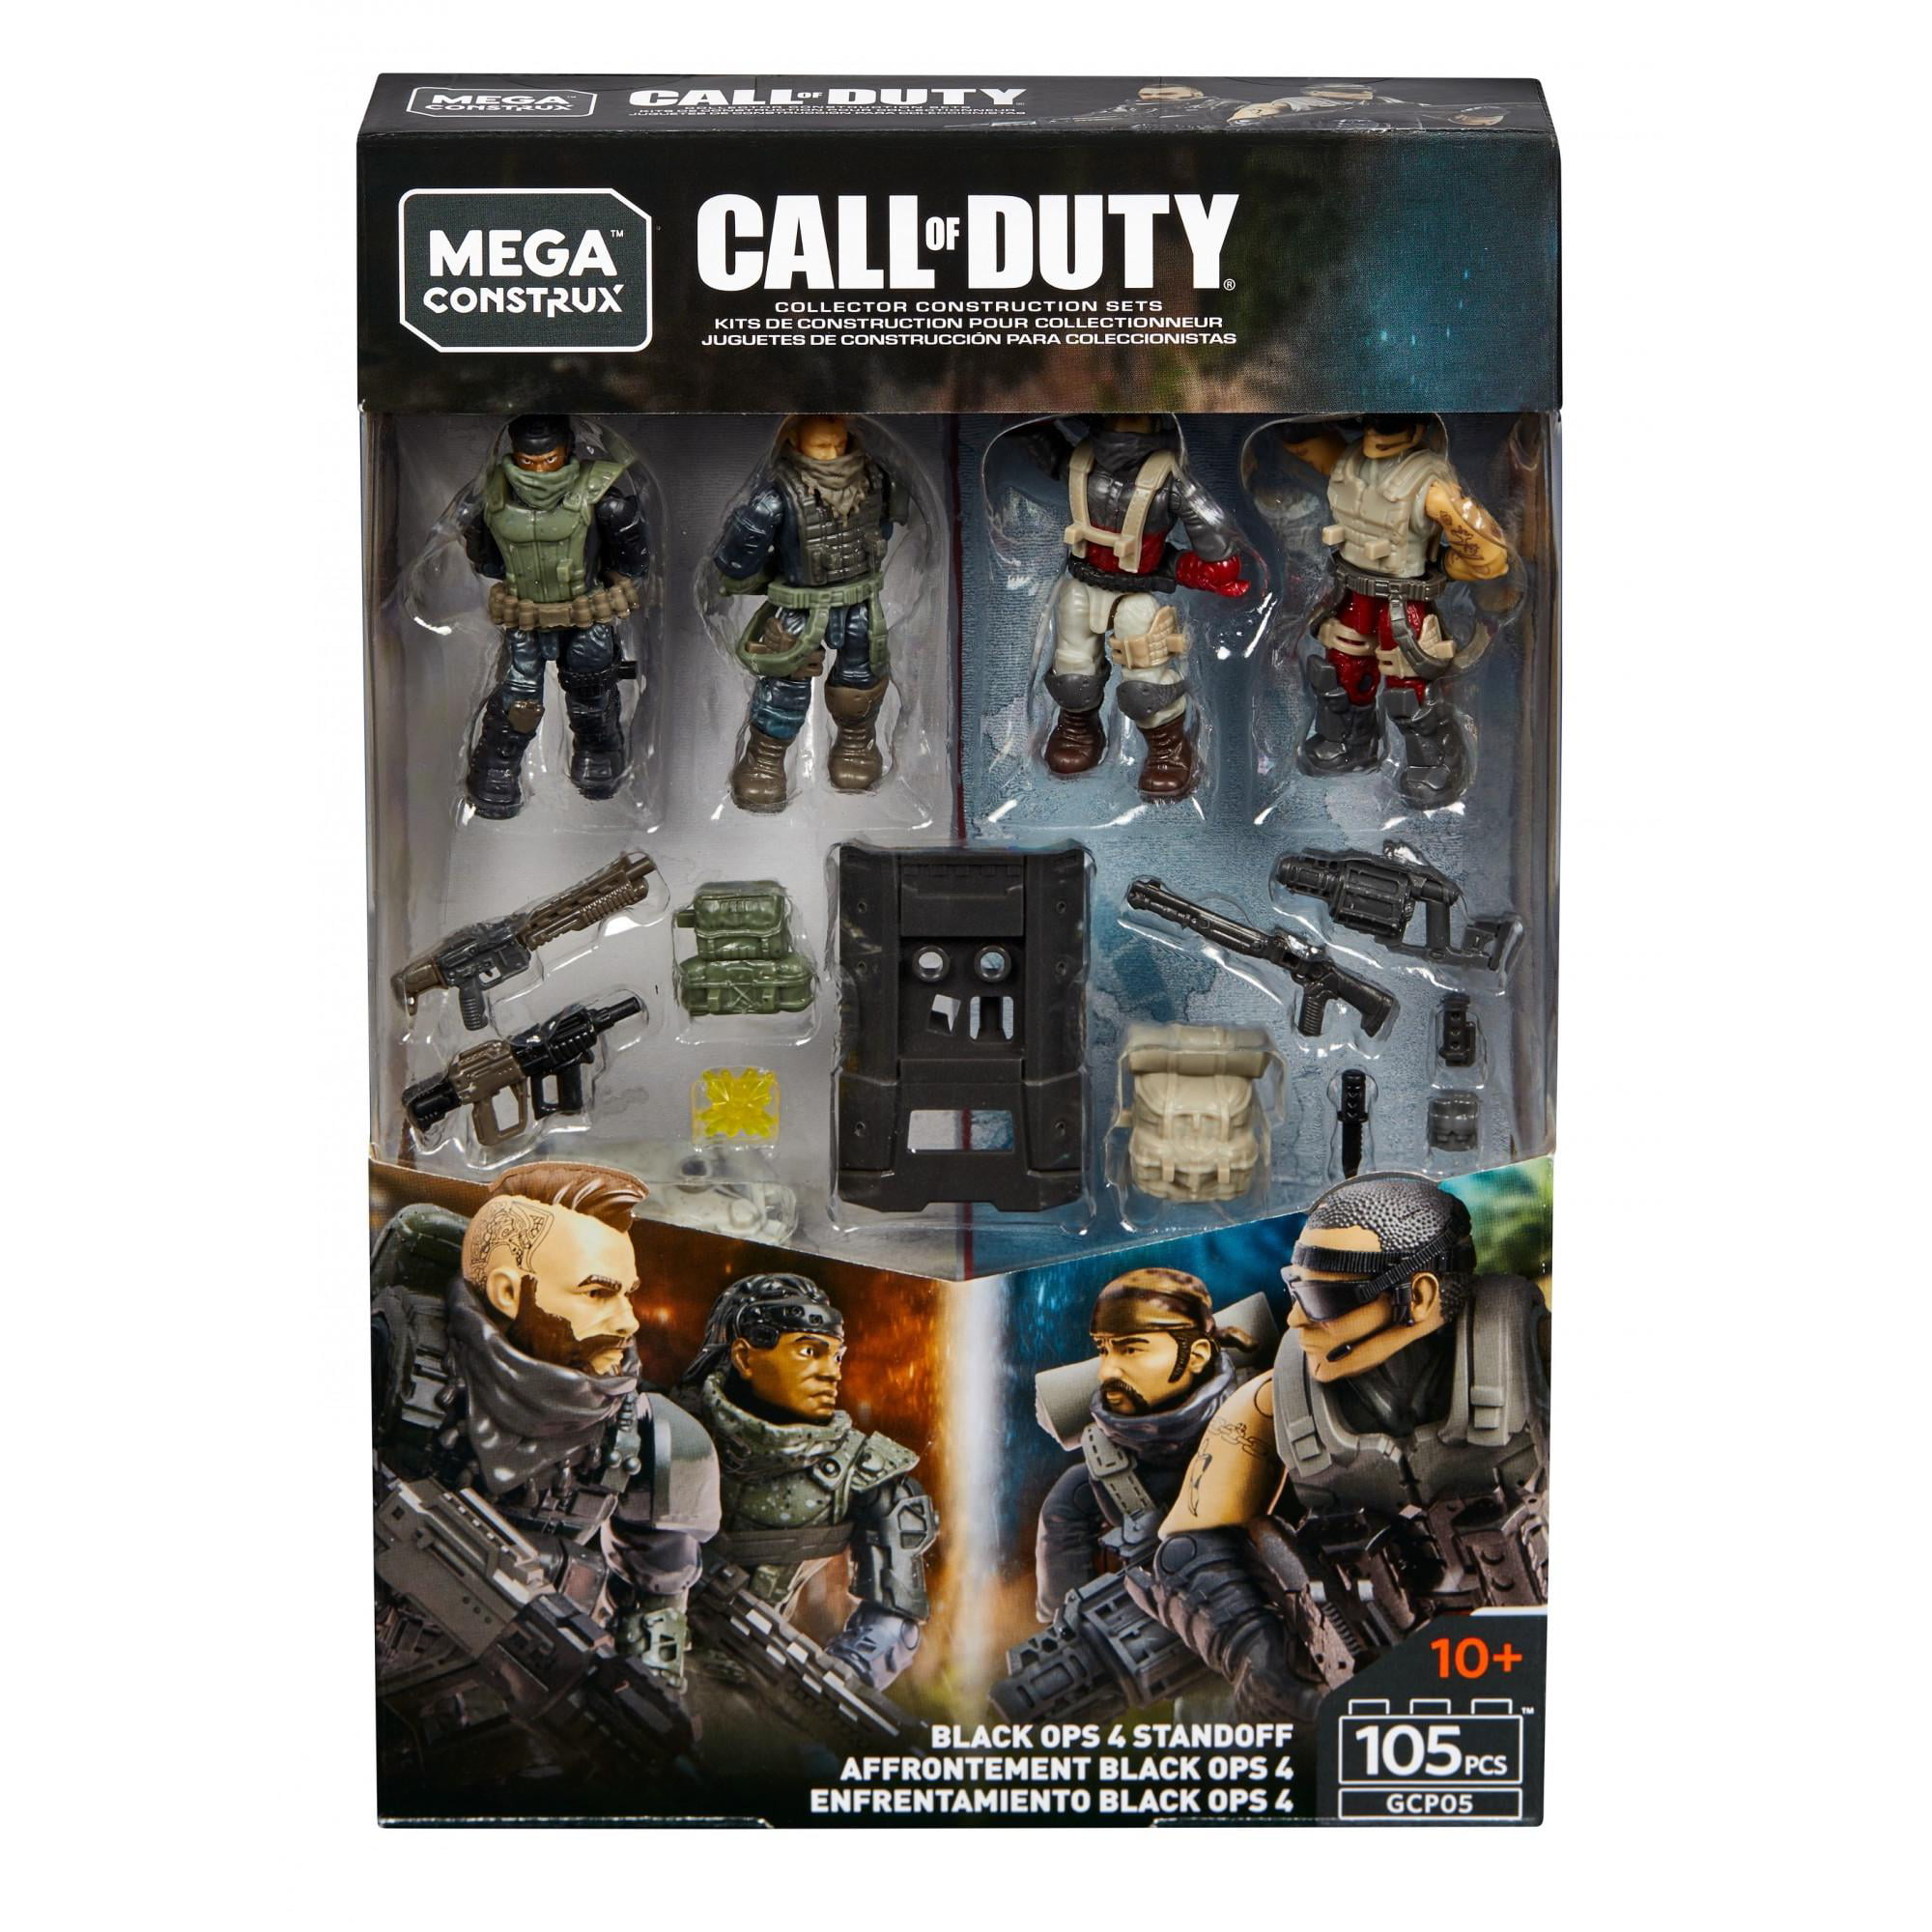 FULL SET OF 6 NEW SEALED IN CASE Call of Duty COD Mega Construx SERIES 2 